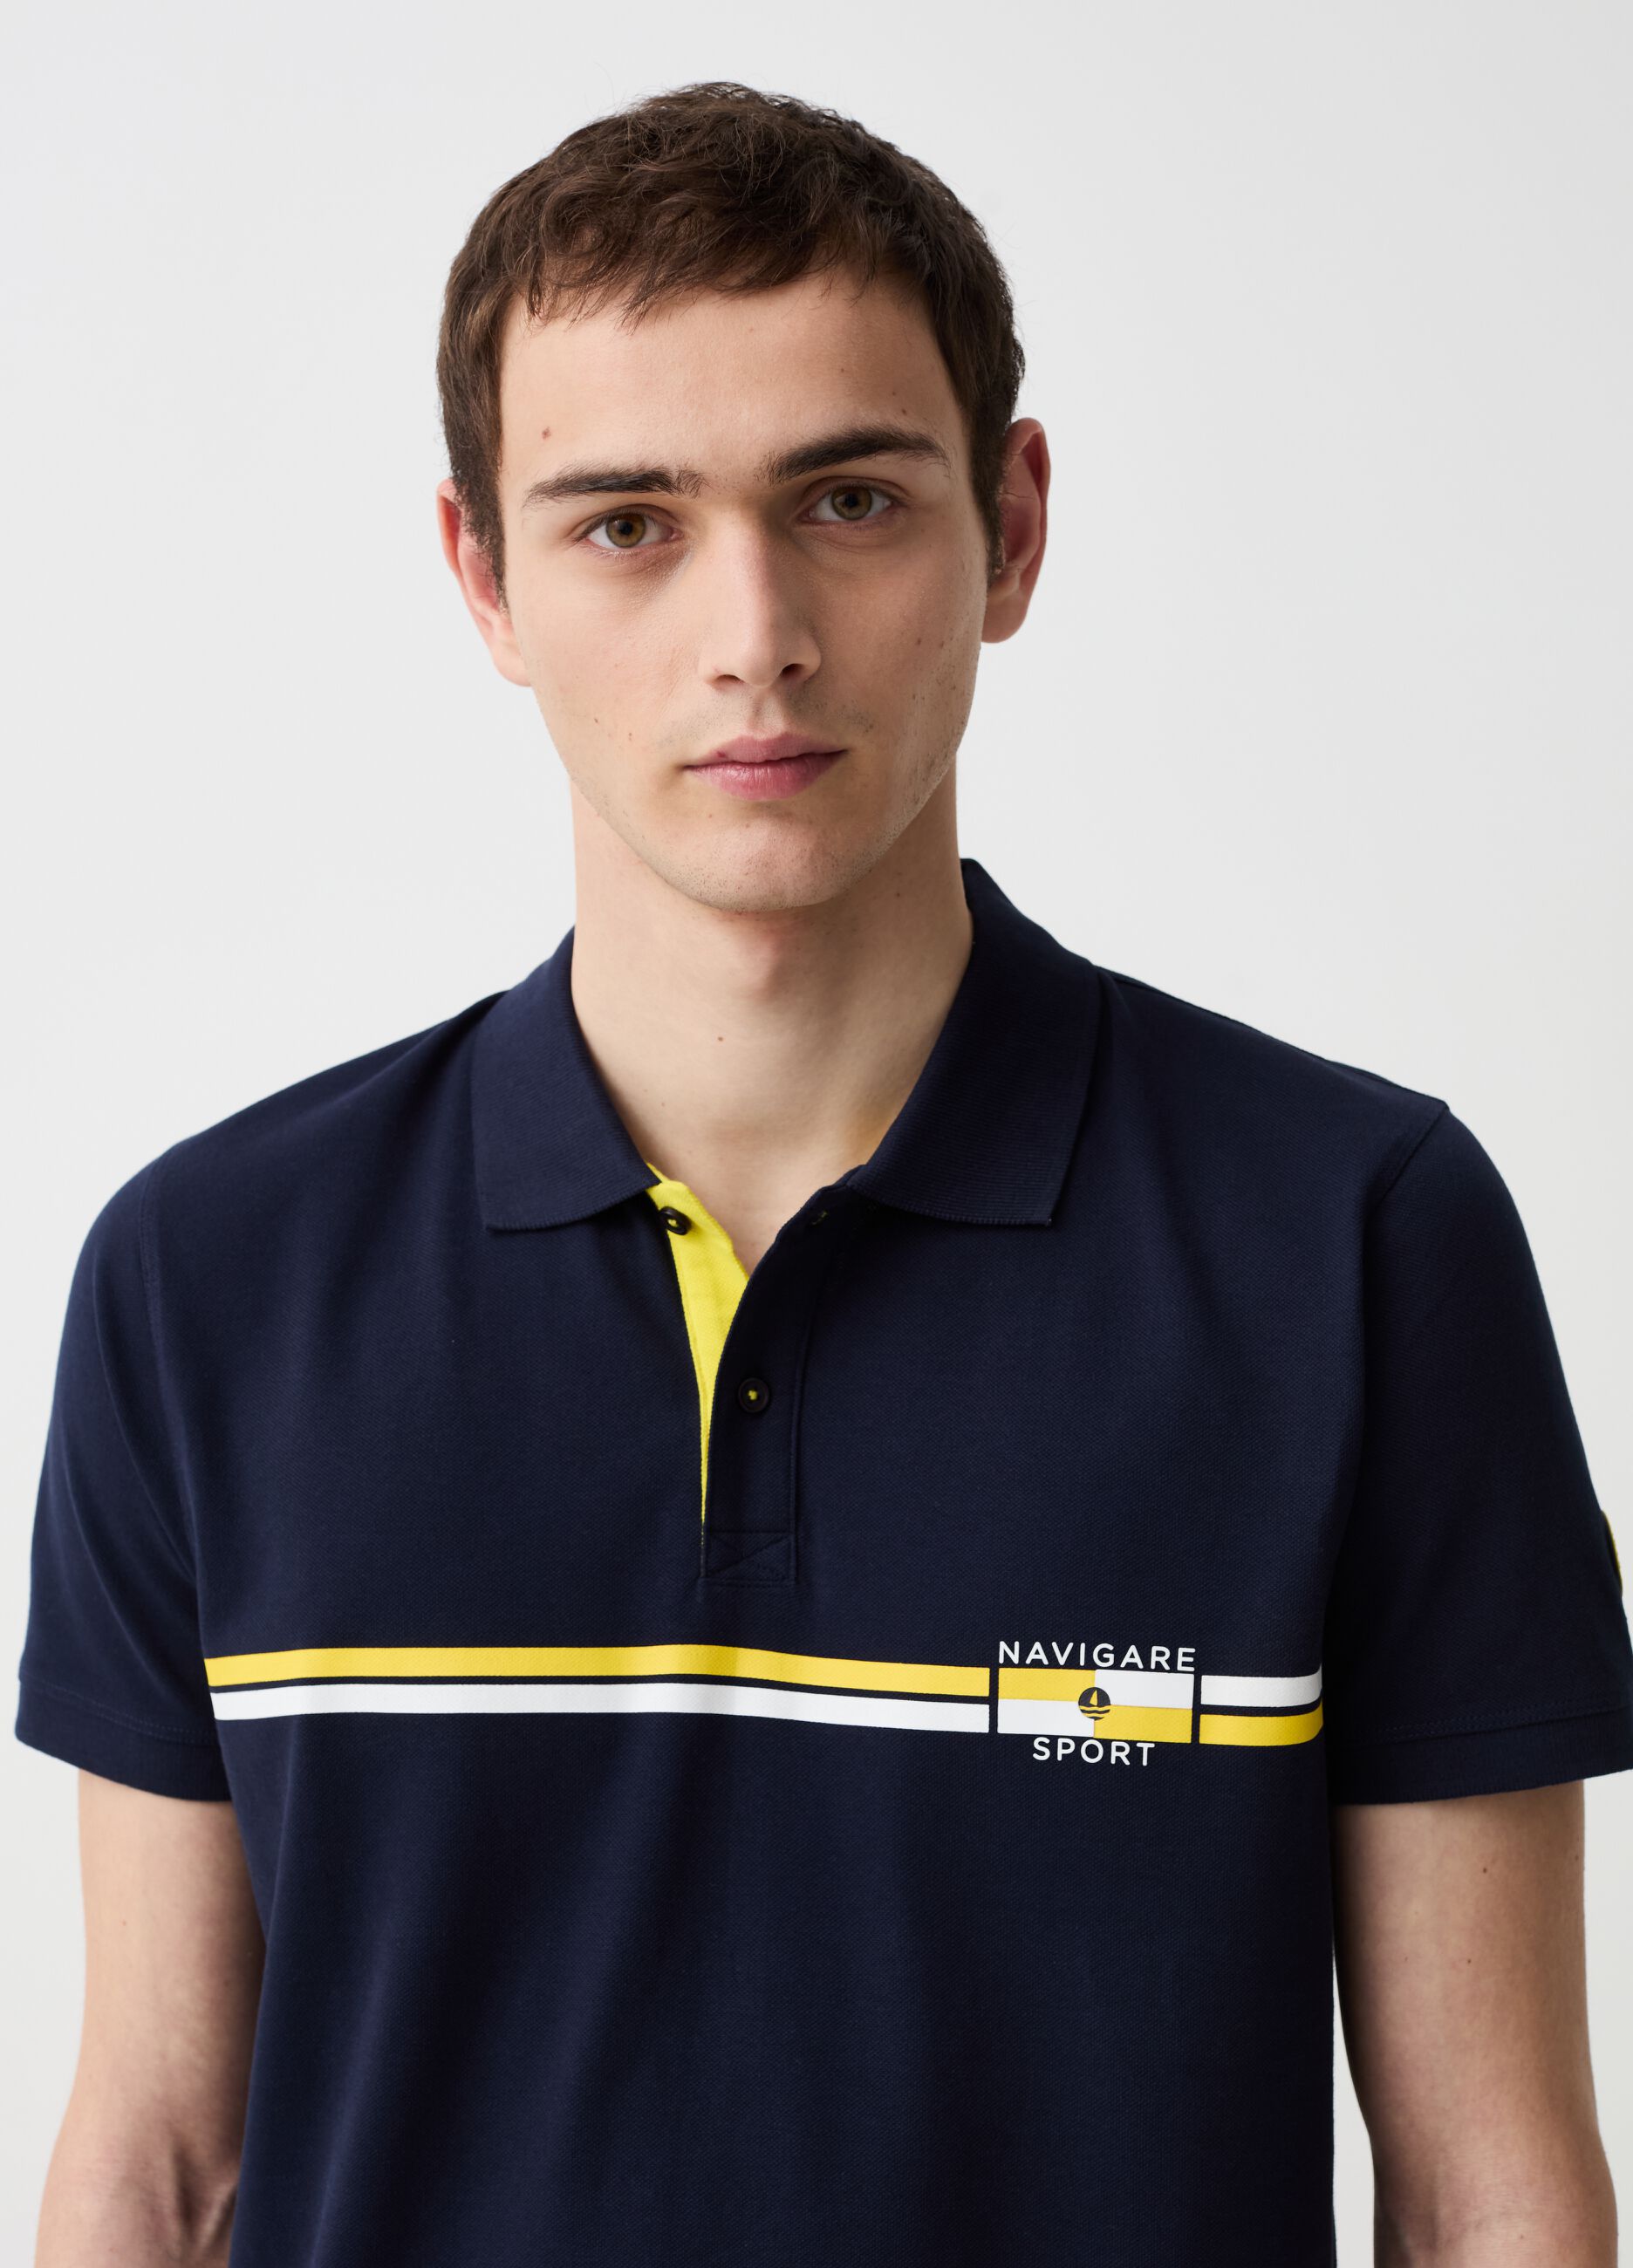 Navigare Sport polo shirt with detail and stripes